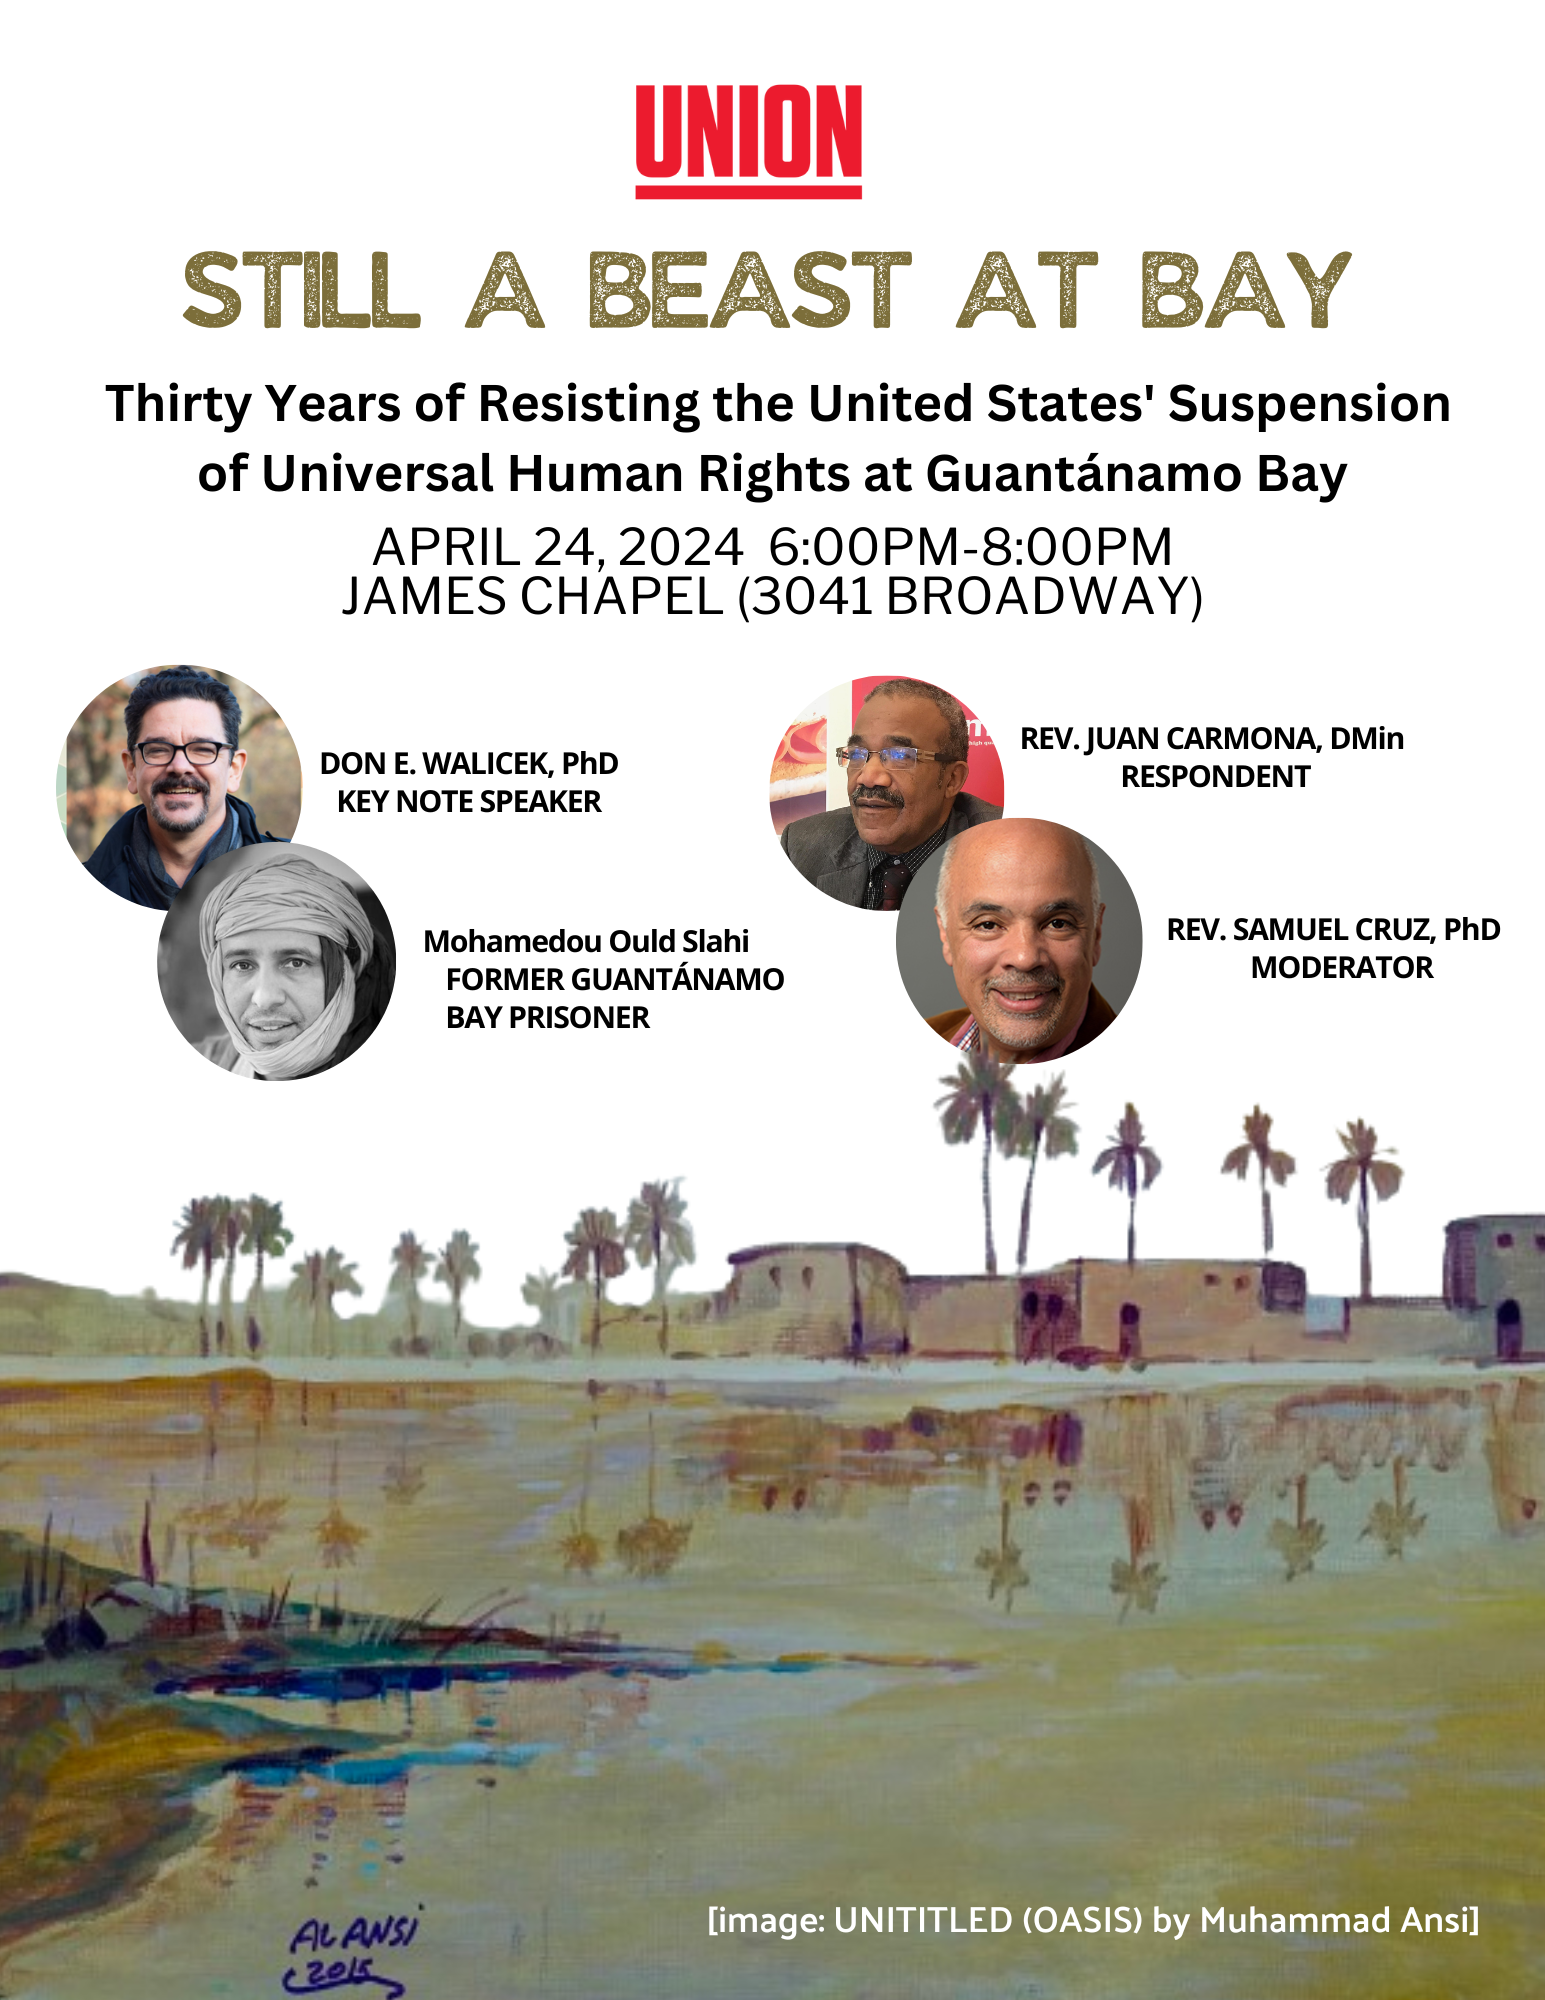 Still A Beast At Bay: Thirty Years of Resisting the United States' Suspension of Universal Human Rights at Guantanamo Bay @ James Chapel, Union Theological Seminary | New York | New York | United States